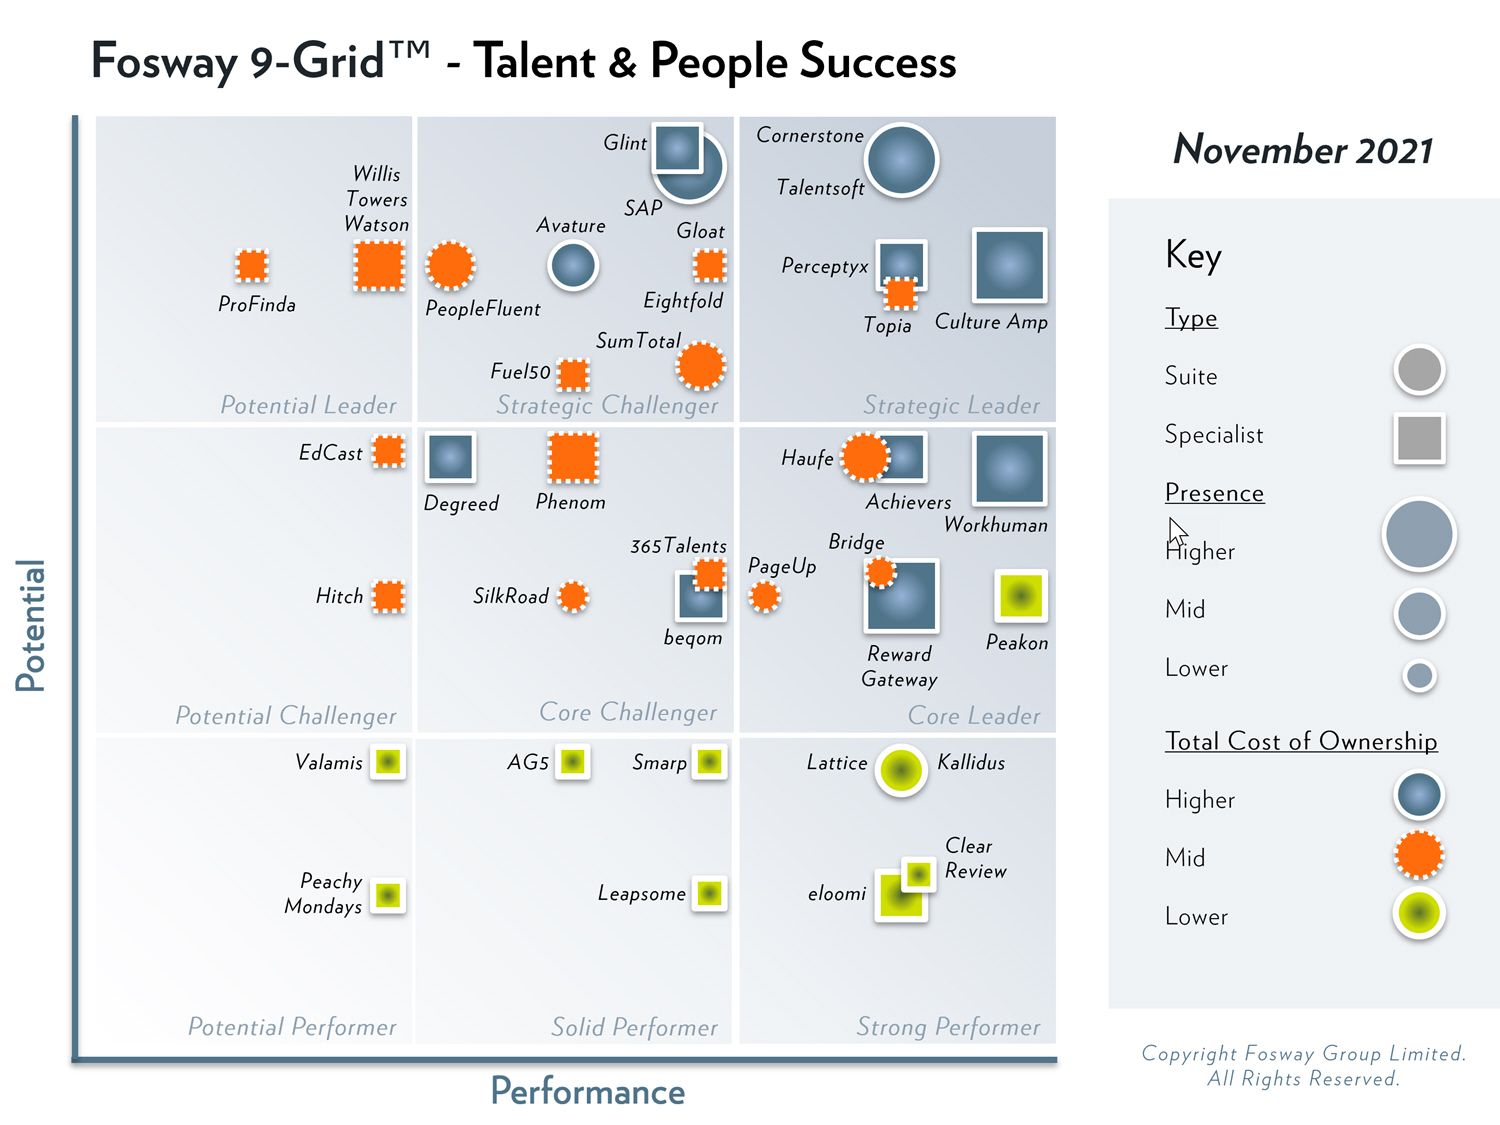 This is an image: Fosway 9-Grid for Talent and People Success